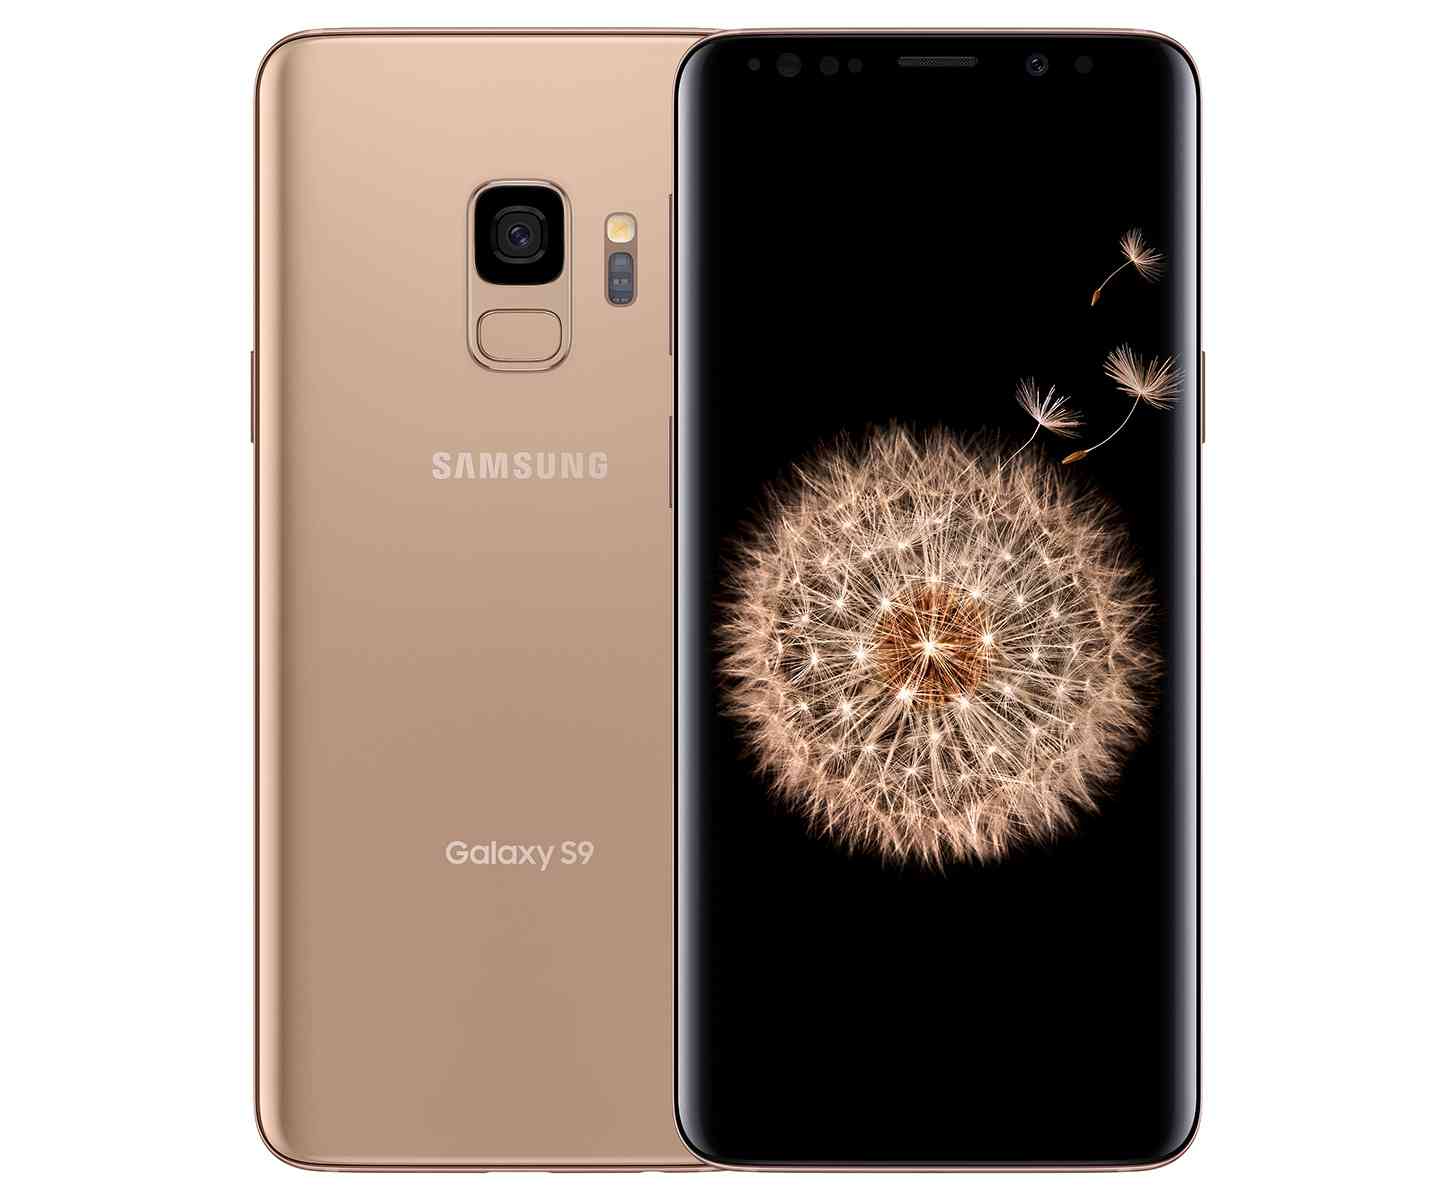 Samsung Galaxy S9 Sunrise Gold official